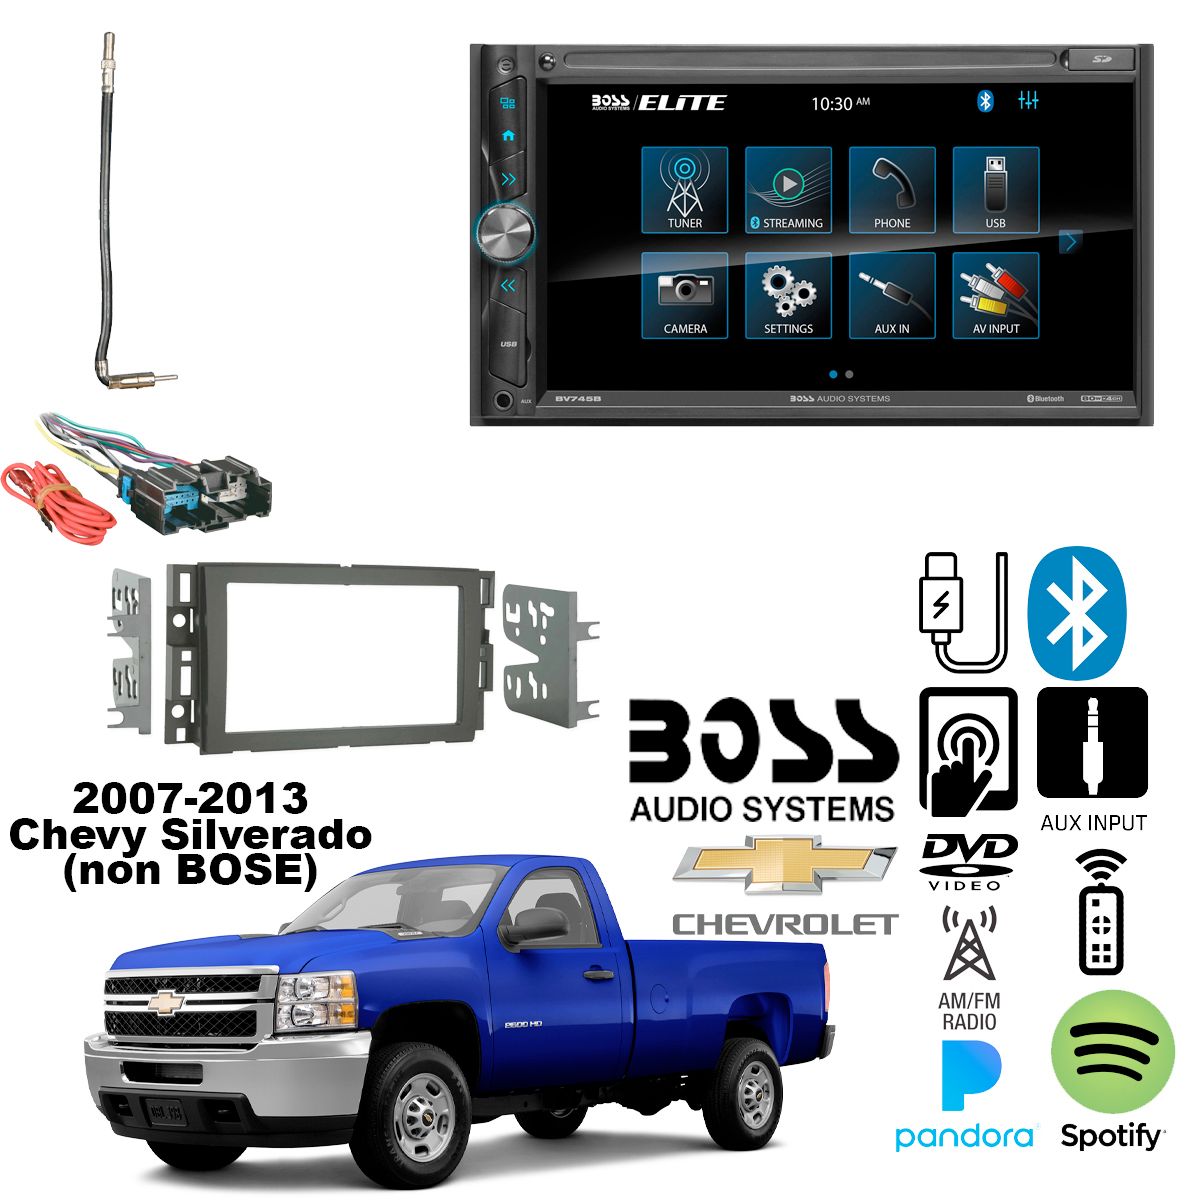 2-DIN 6.95" Touchscreen USB,  AUX For 2007-13 Chevy Silverado With Install Parts